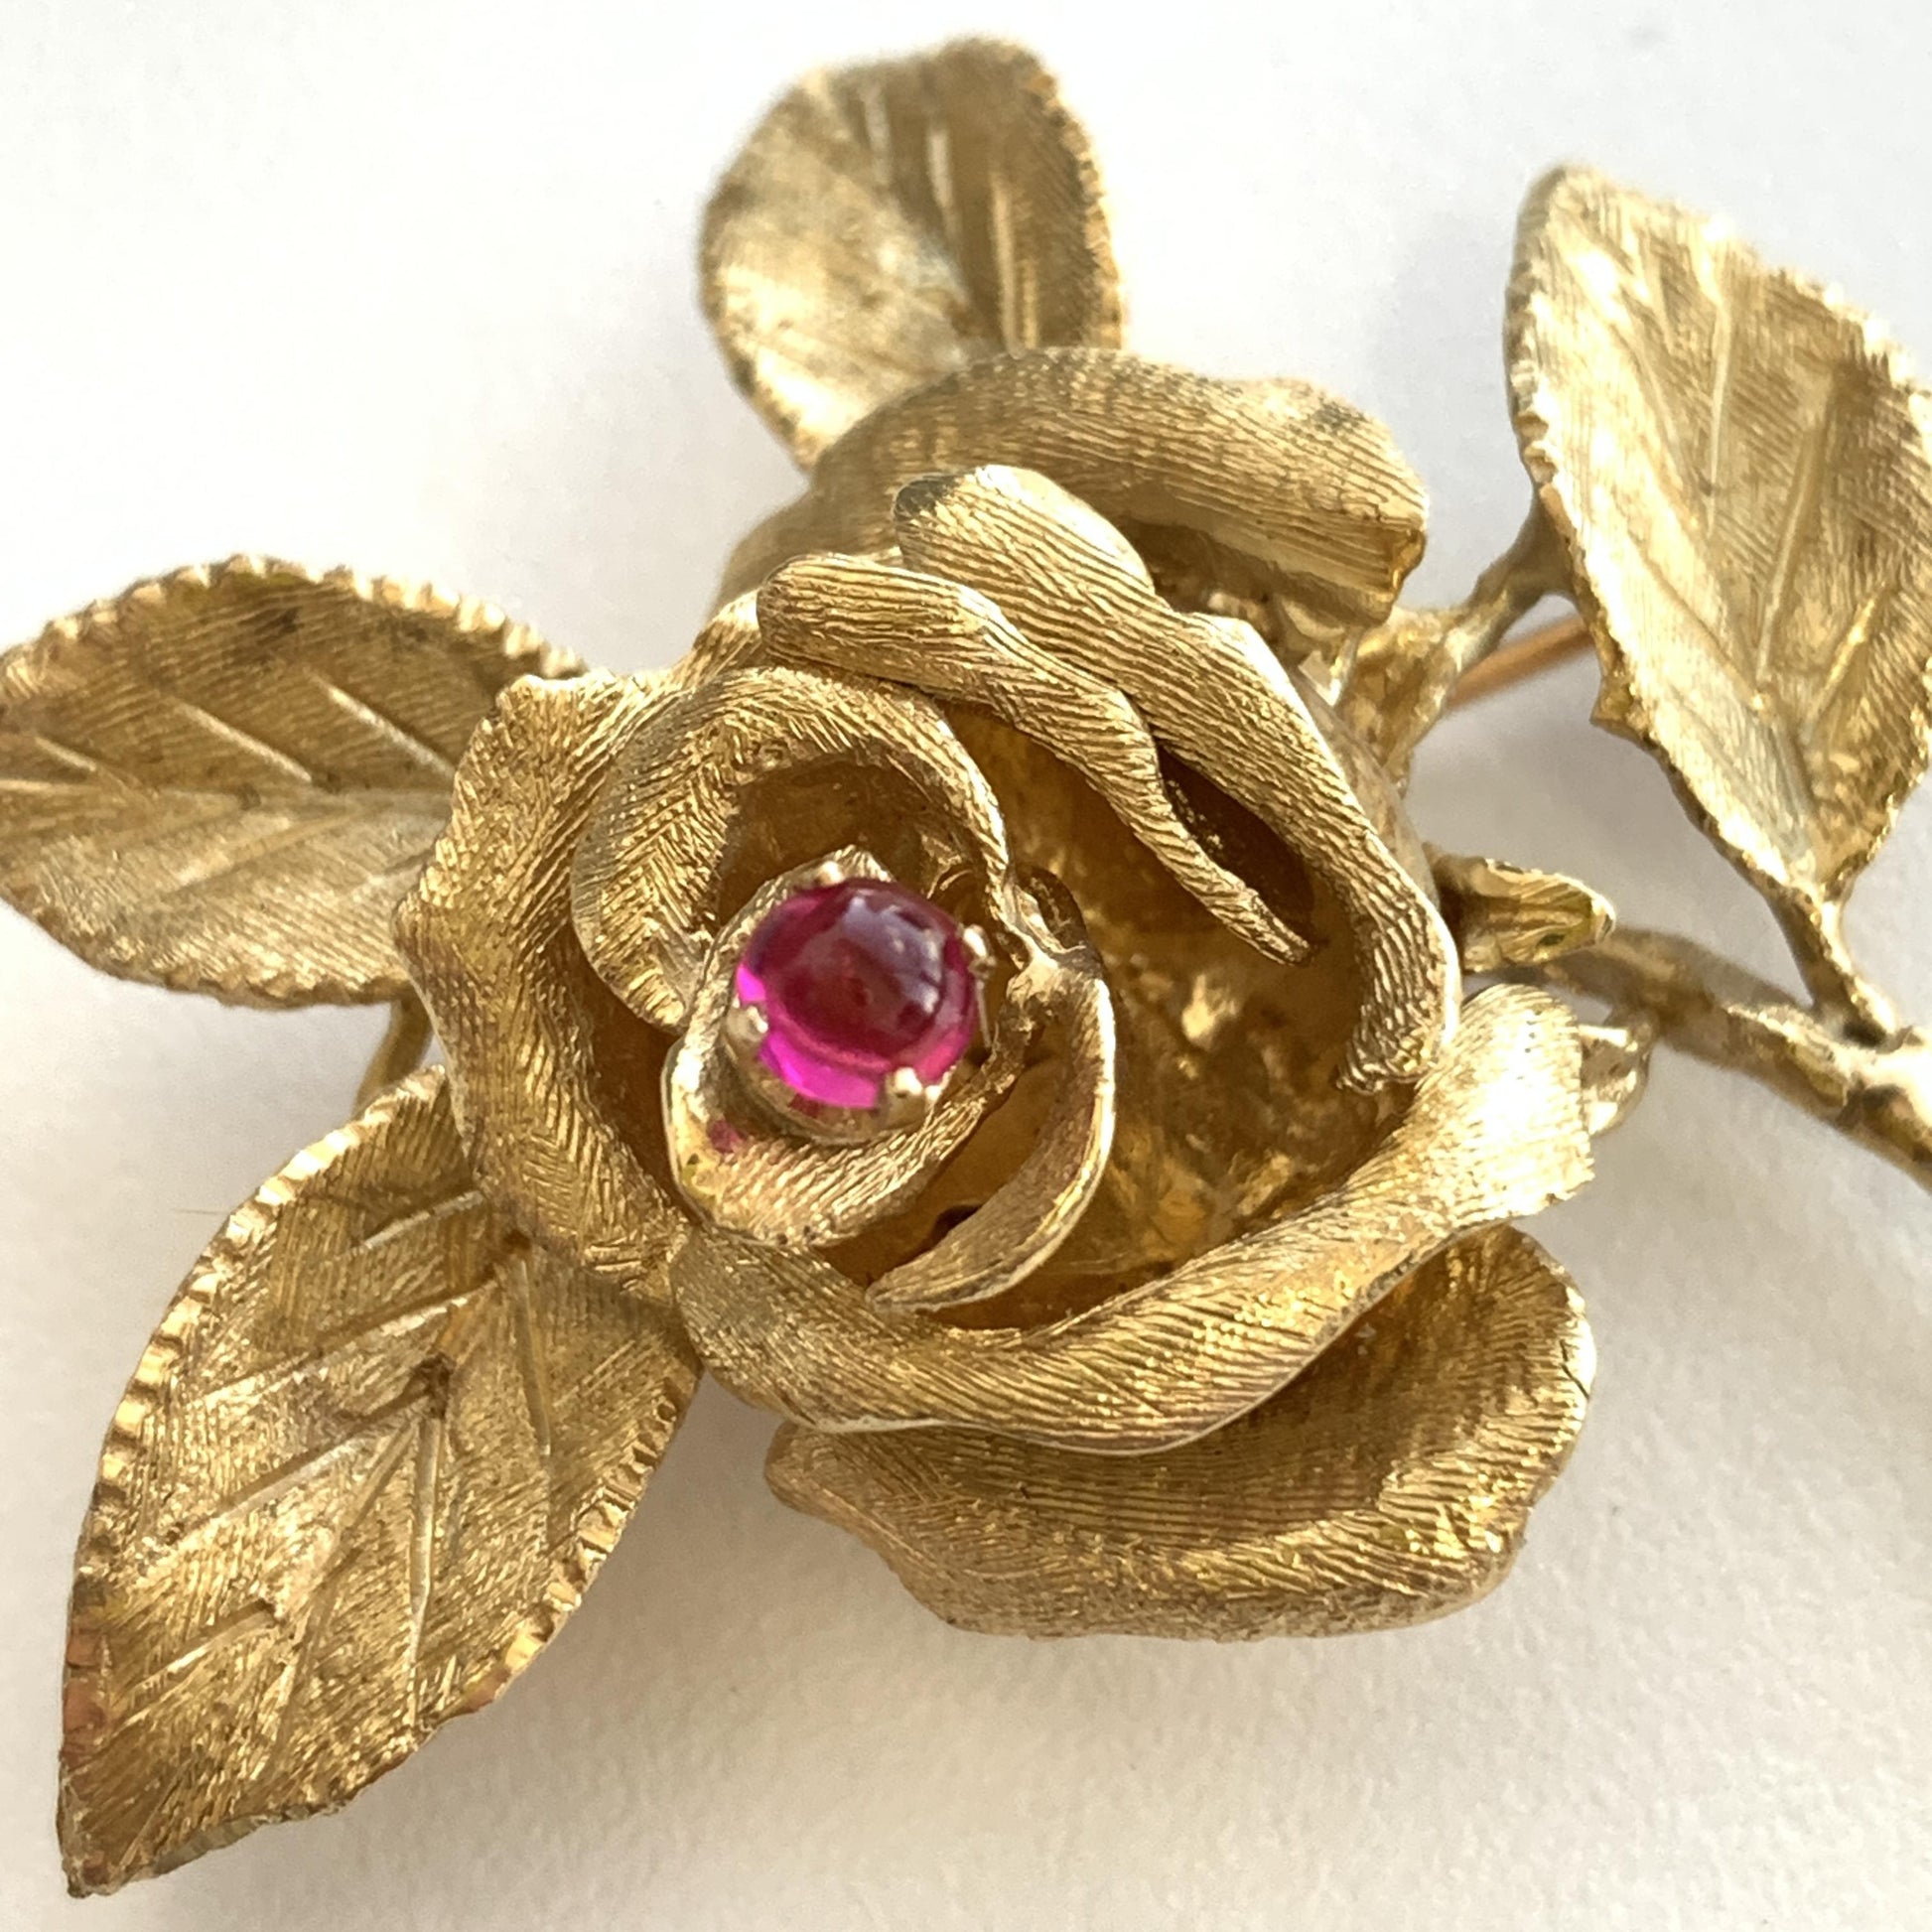 14K Yellow Gold Rose Brooch With Ruby 12.68g.